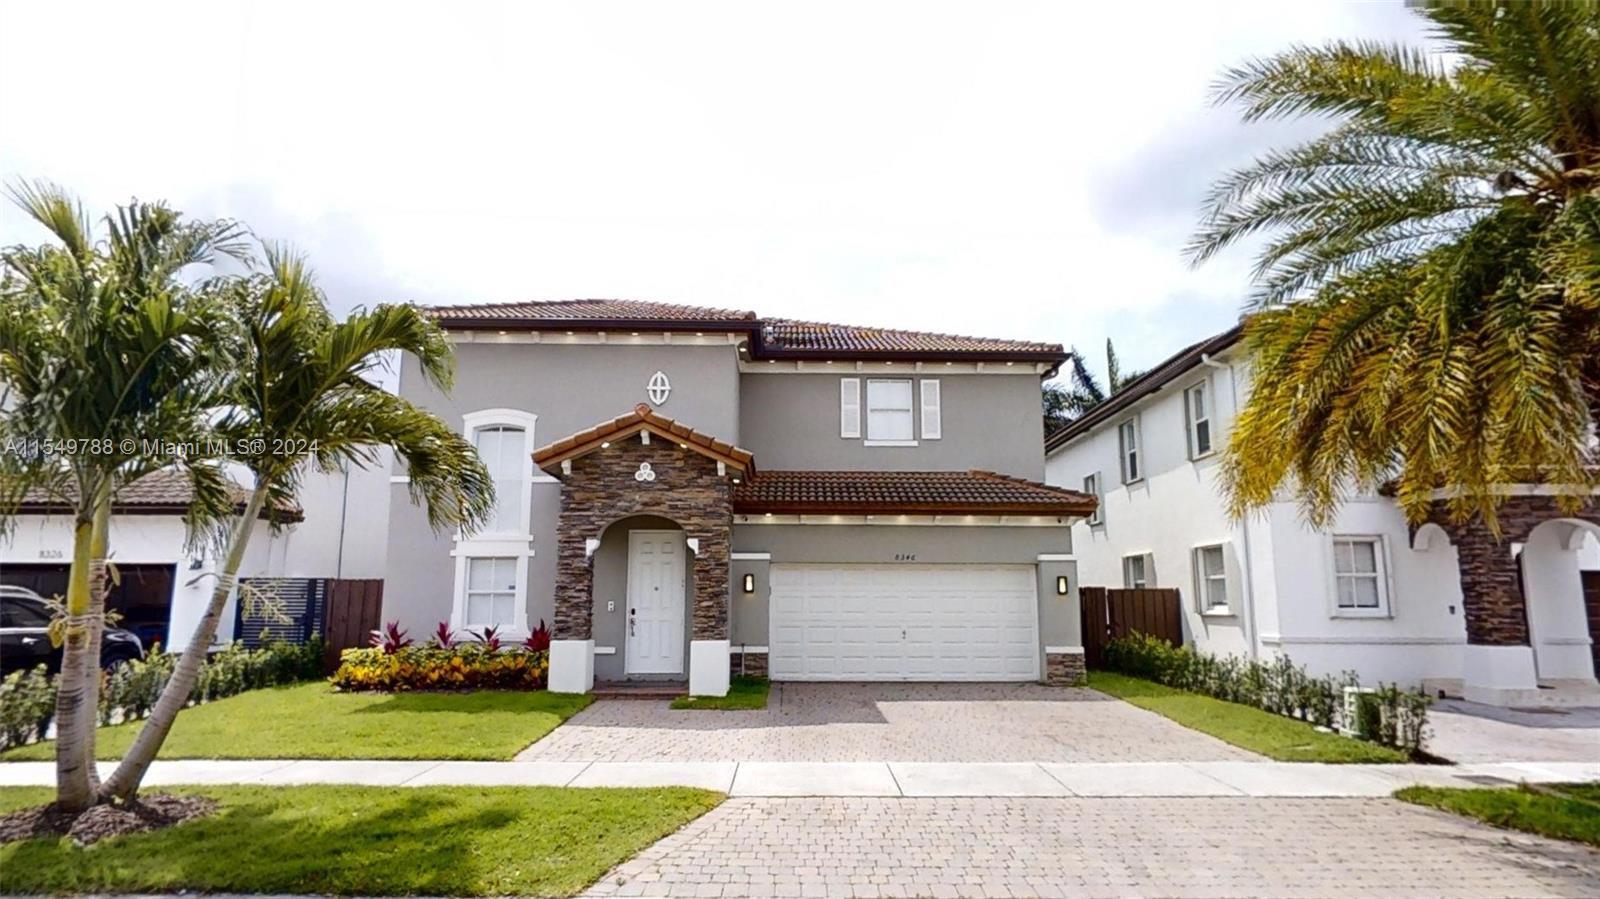 Stunning Two-Story single family home in the most exclusive community, Menorca in Isle at Doral. Thi